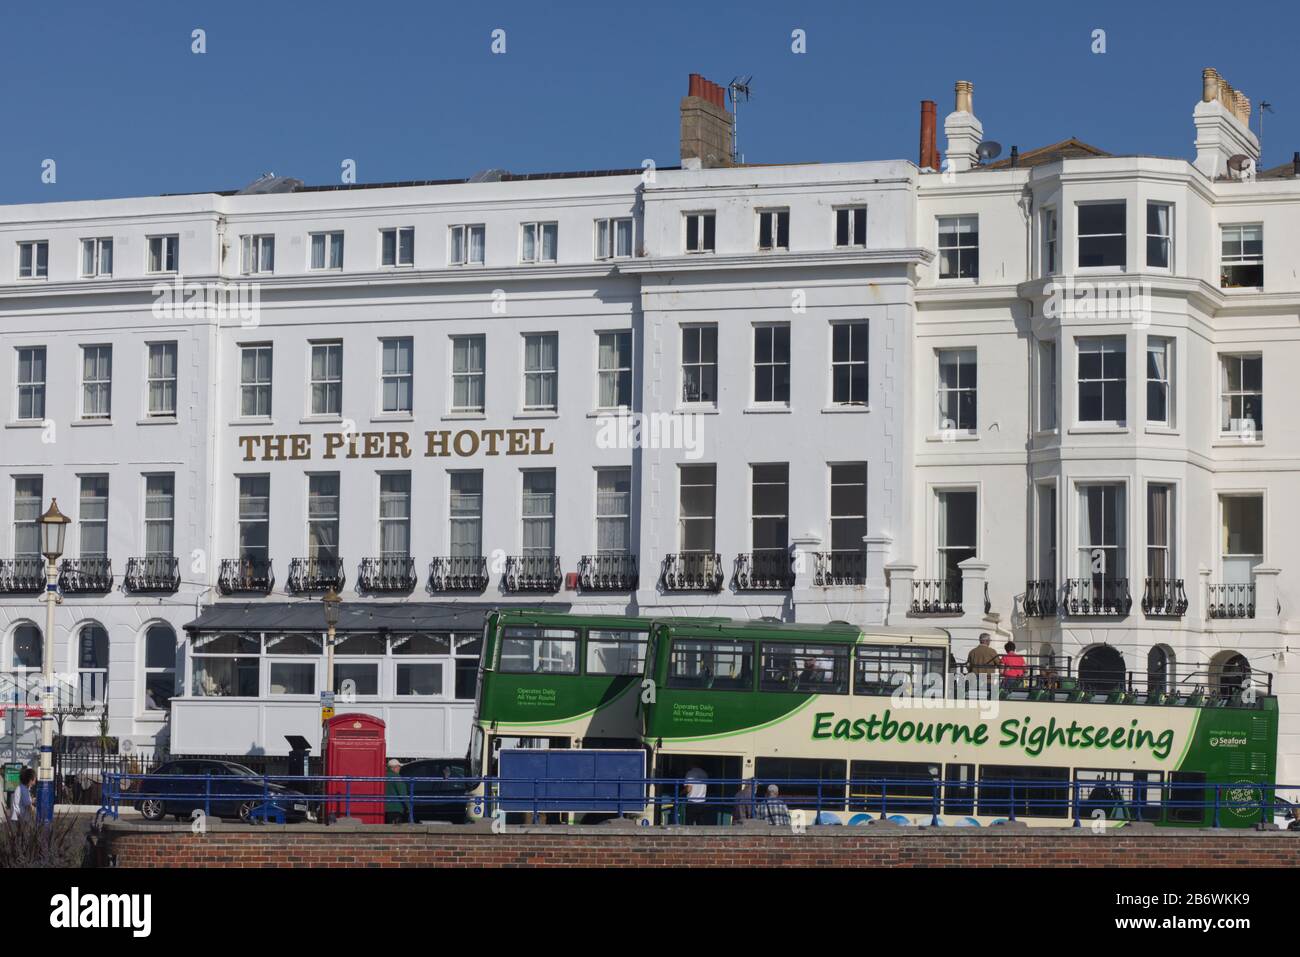 Eastbourne sightseeing bus and the pier hotel Stock Photo